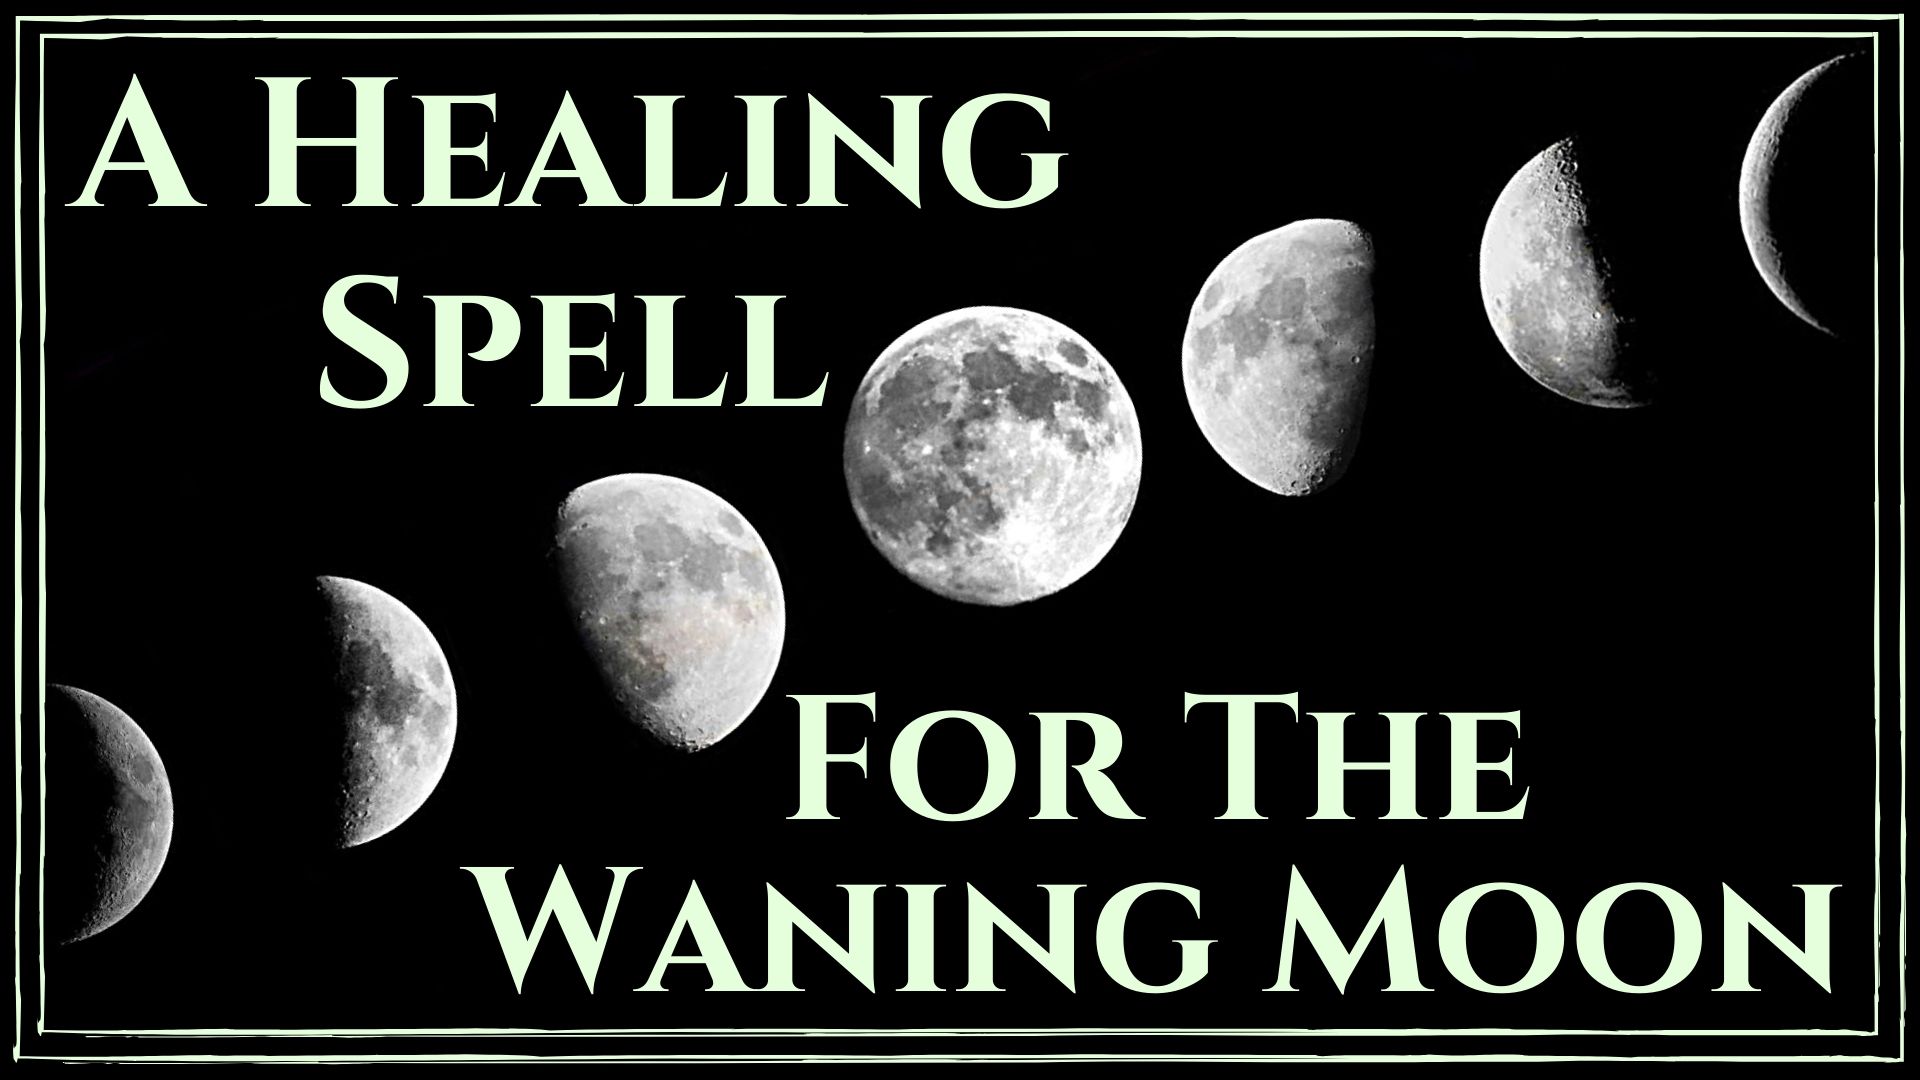 A Healing Spell For The Waning Moon